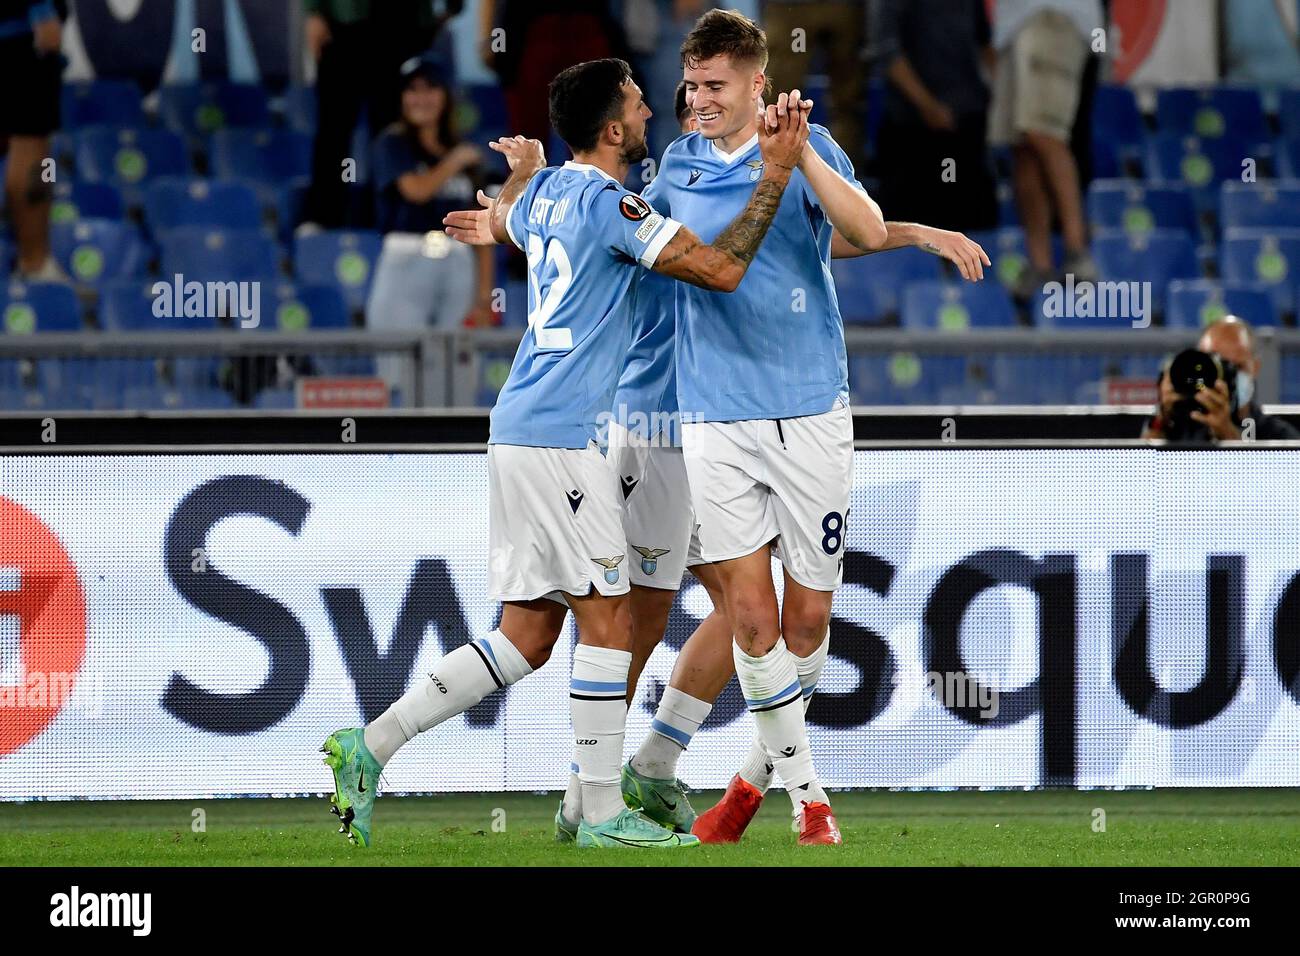 Rome, Italy. 30th Sep, 2021. Toma Basic of SS Lazio (r) celebrates with Danilo Cataldi and Patric Gil after scoring the goal of 1-0 during the Europa League group stage football match between SS Lazio and Lokomotiv Moskva at Olimpico stadium in Rome (Italy), September 30th, 2021. Photo Antonietta Baldassarre/Insidefoto Credit: insidefoto srl/Alamy Live News Stock Photo